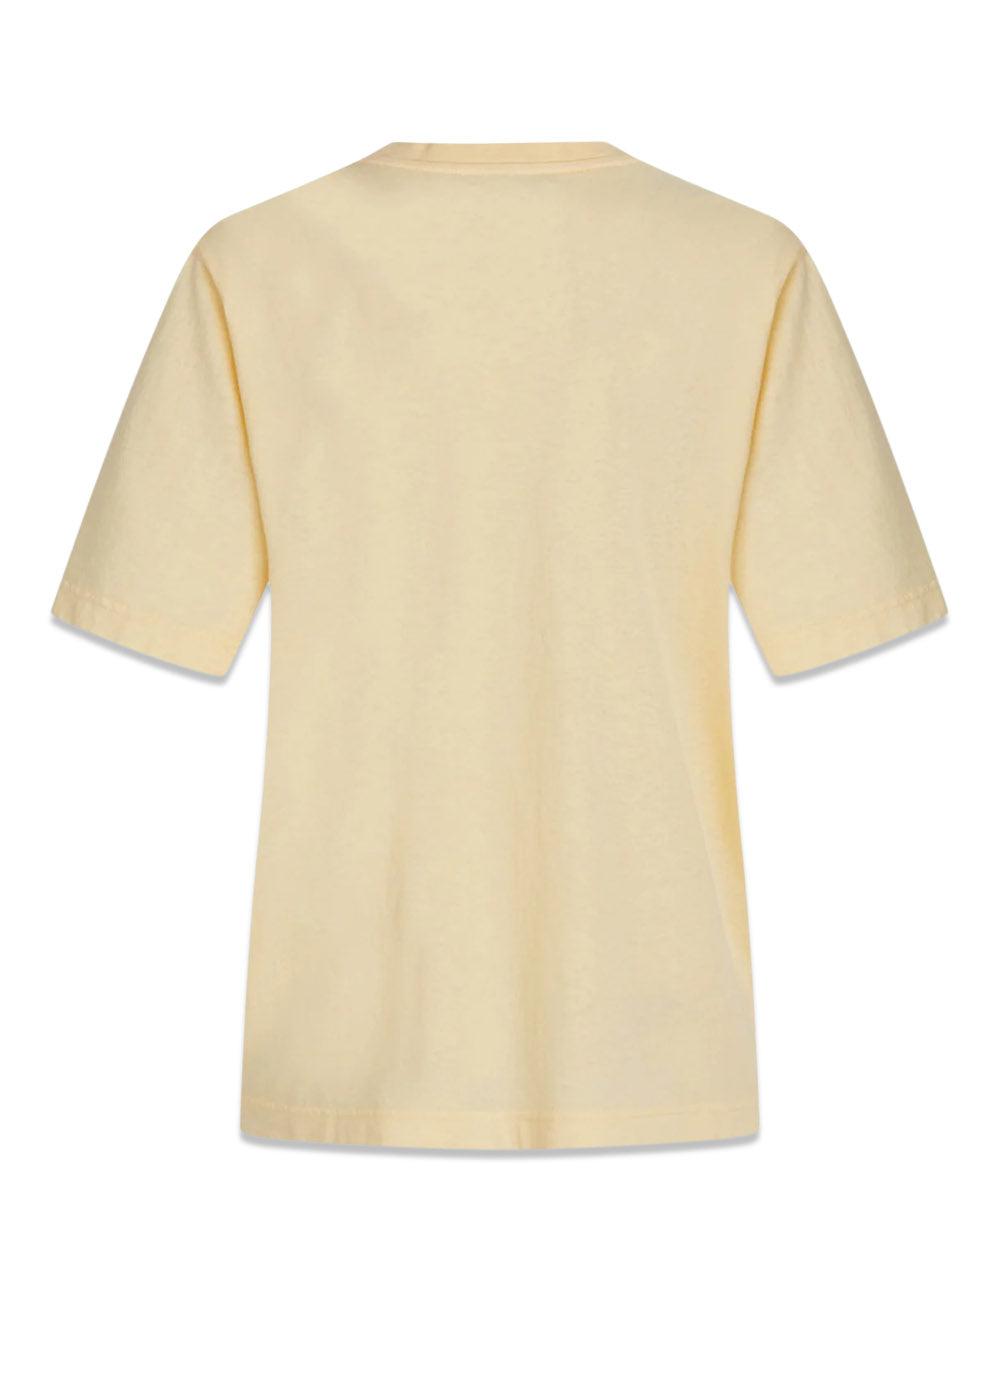 Washed Jersey Dassel Tee - Double Cream